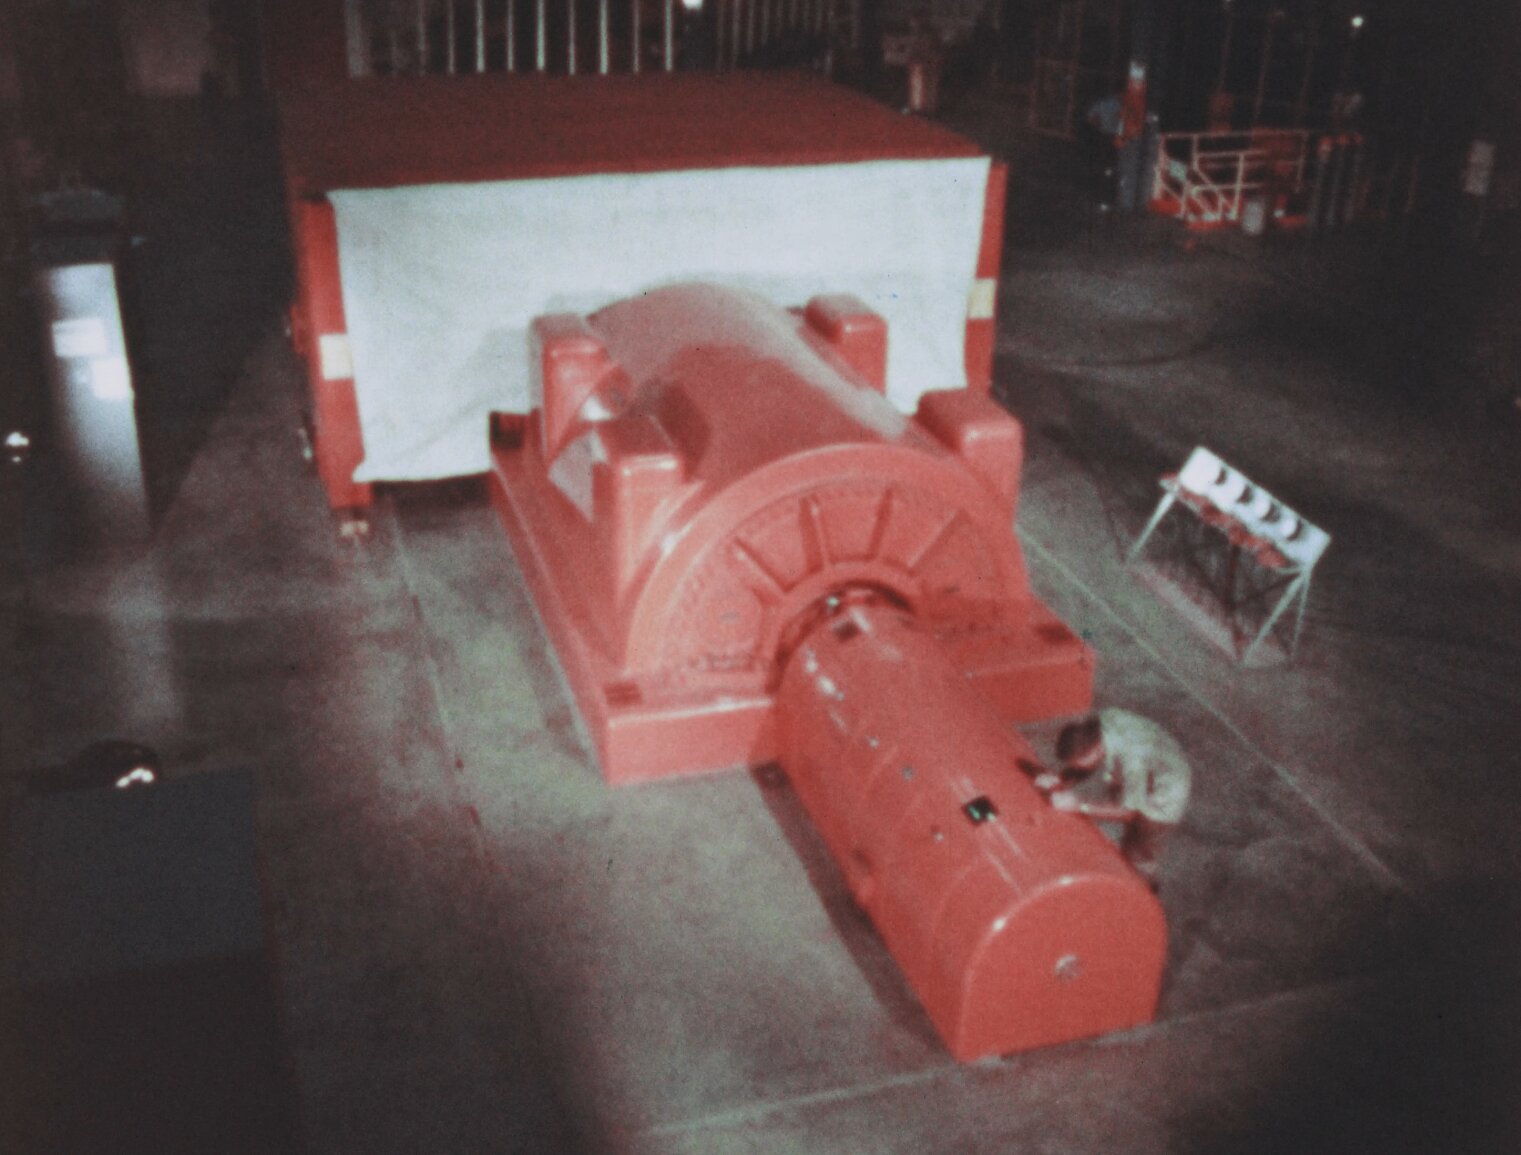 The Bonus turbine generator, an orange set of cylindars mounted in concrete with a technician bending over one.